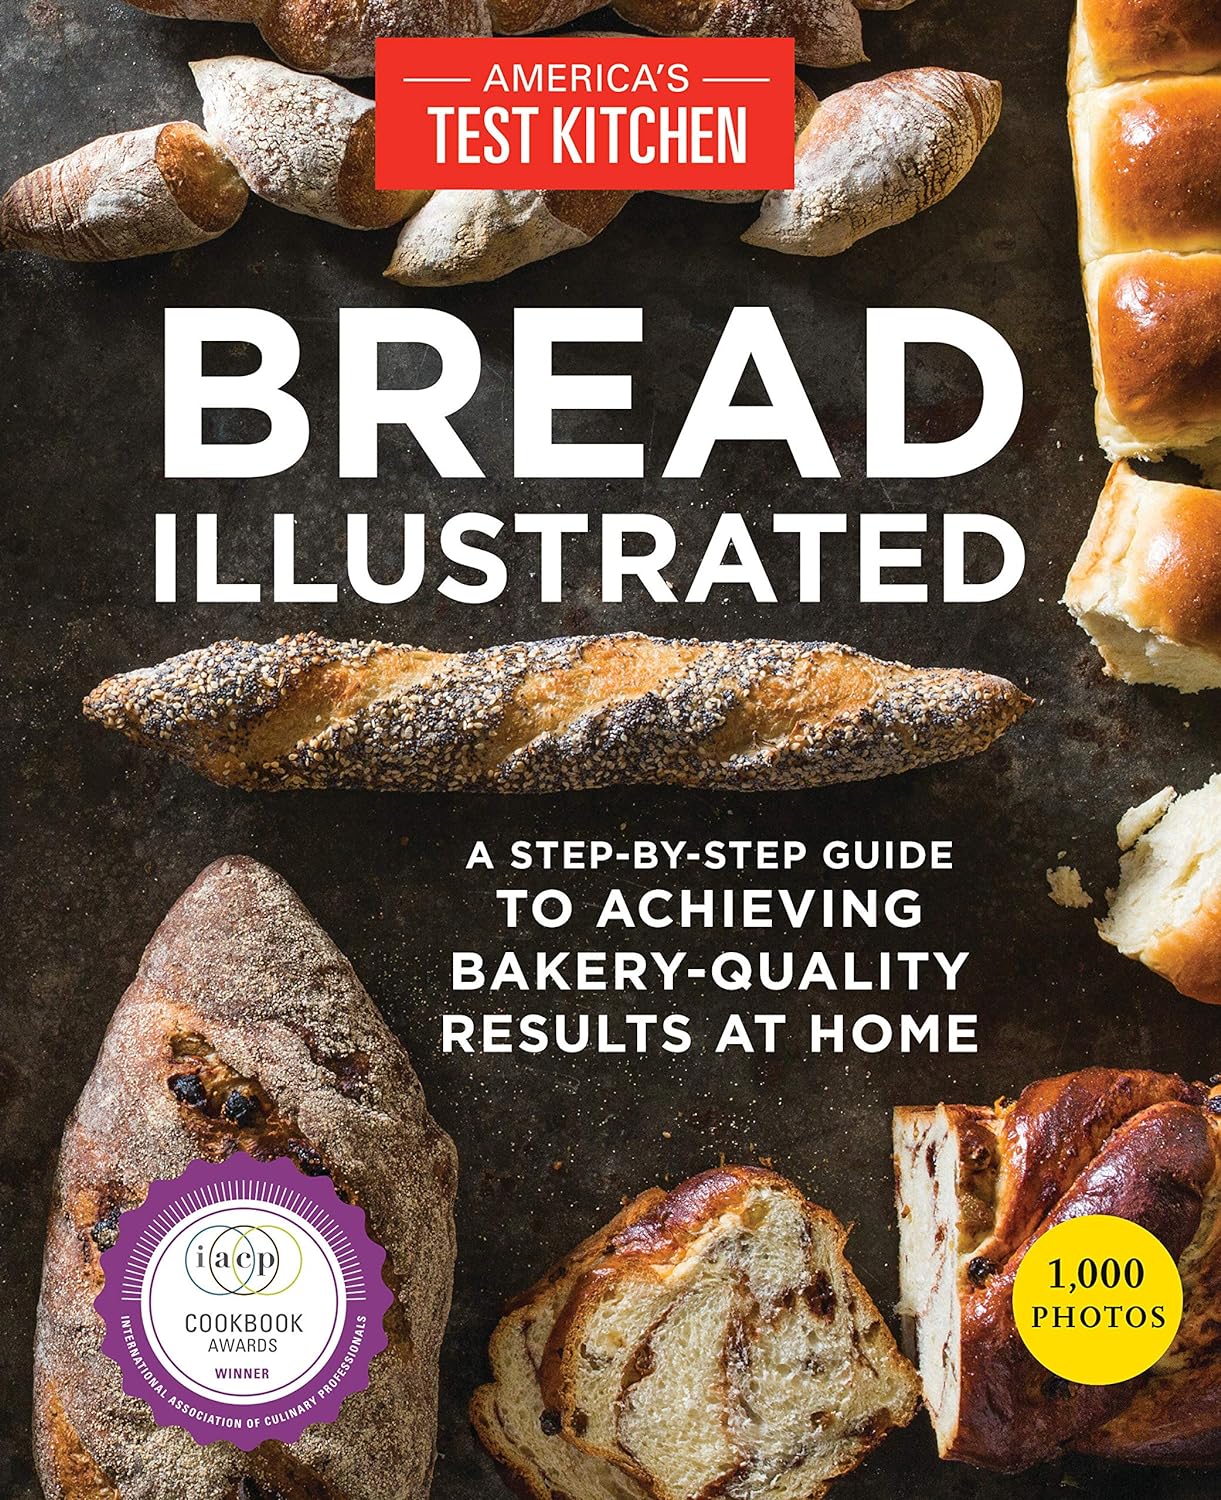 Bread Illustrated: A Step-By-Step Guide to Achieving Bakery-Quality Results At Home - by America's Test Kitchen